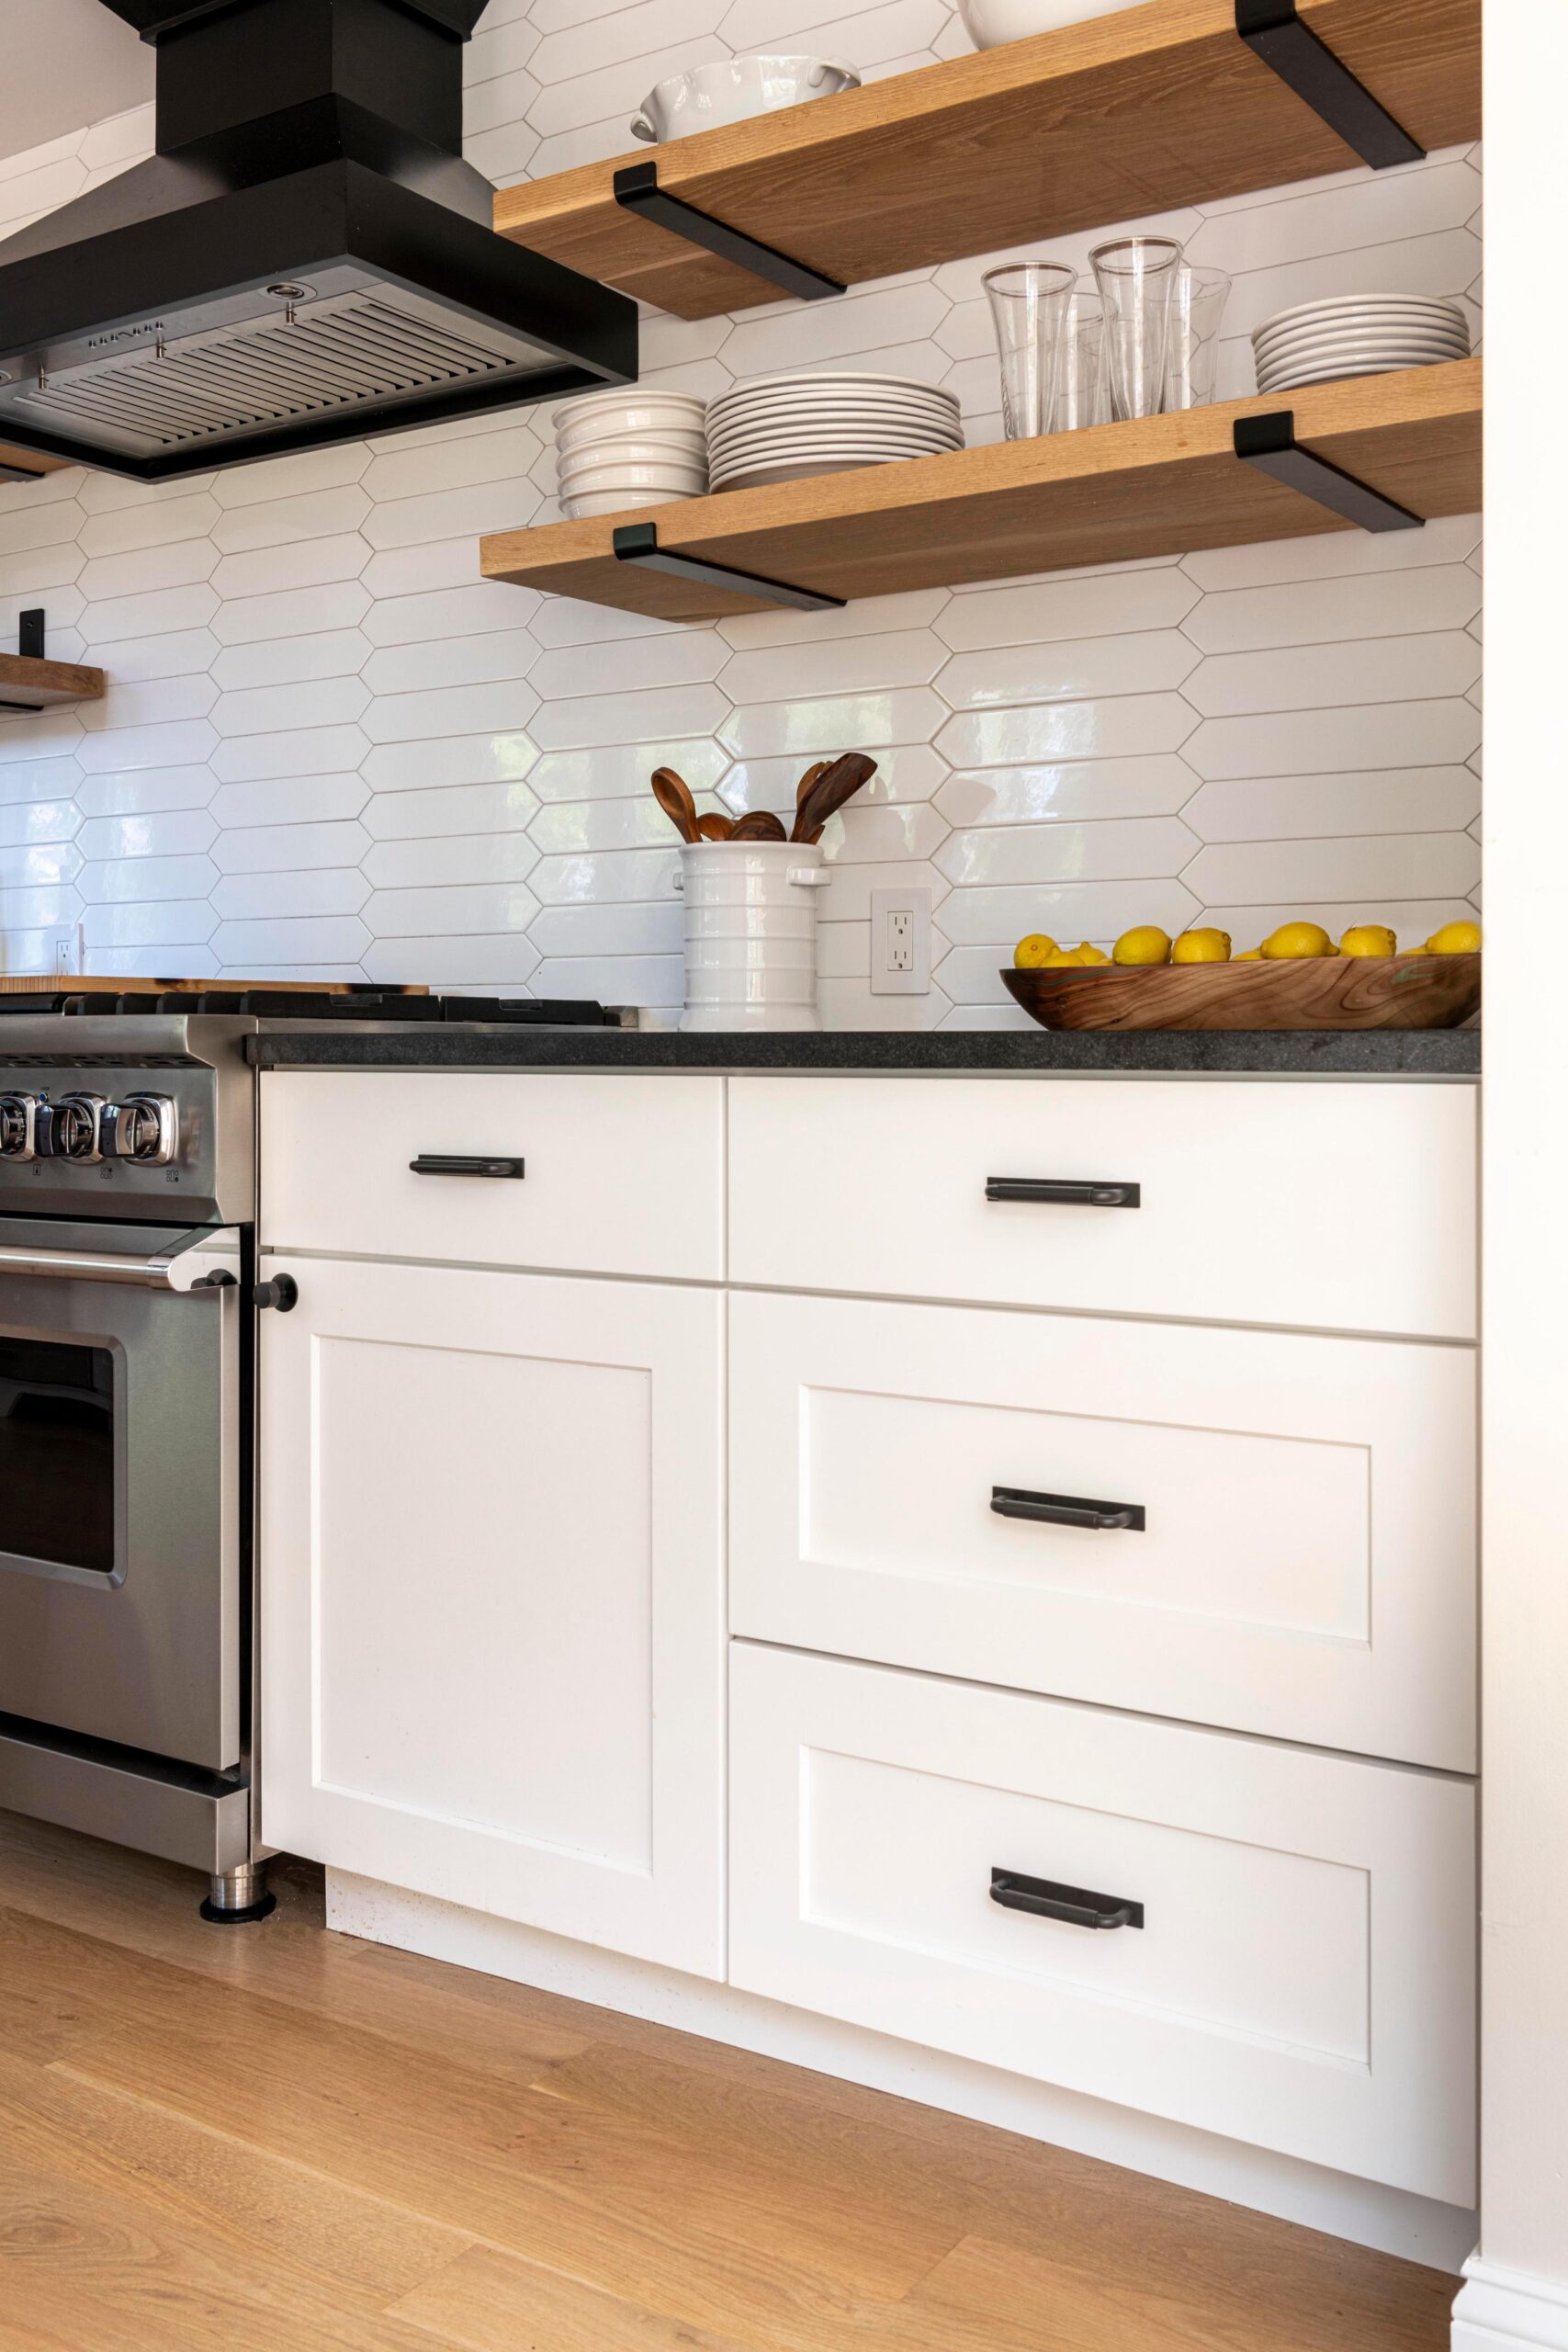 White cabinets with black handles. Above are open shelves with plates, cups, and bowls.